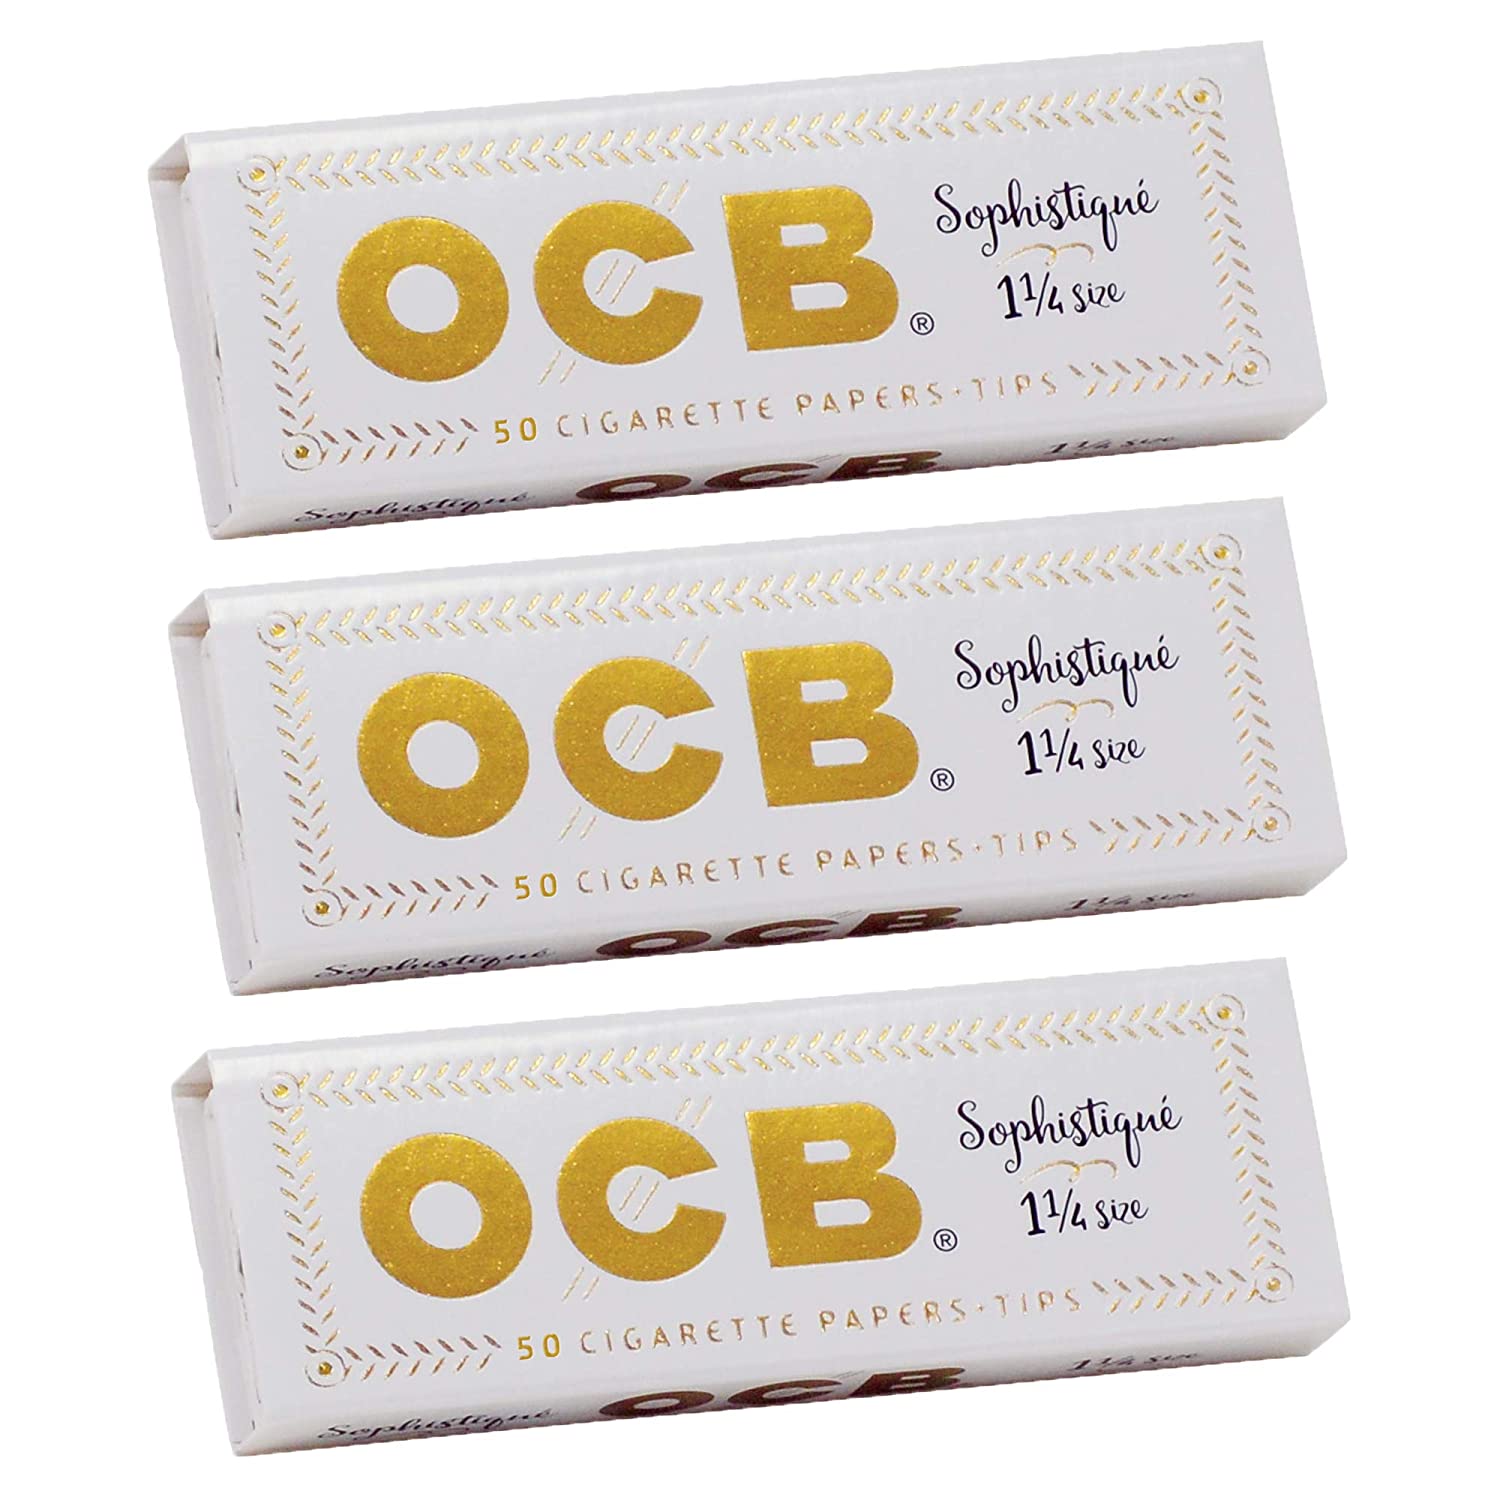 OCB SOPHISTIQUÉ ROLLING PAPERS- 1 1/4 yoga smokes yoga studio, delivery, delivery near me, yoga smokes smoke shop, find smoke shop, head shop near me, yoga studio, headshop, head shop, local smoke shop, psl, psl smoke shop, smoke shop, smokeshop, yoga, yoga studio, dispensary, local dispensary, smokeshop near me, port saint lucie, florida, port st lucie, lounge, life, highlife, love, stoned, highsociety. Yoga Smokes